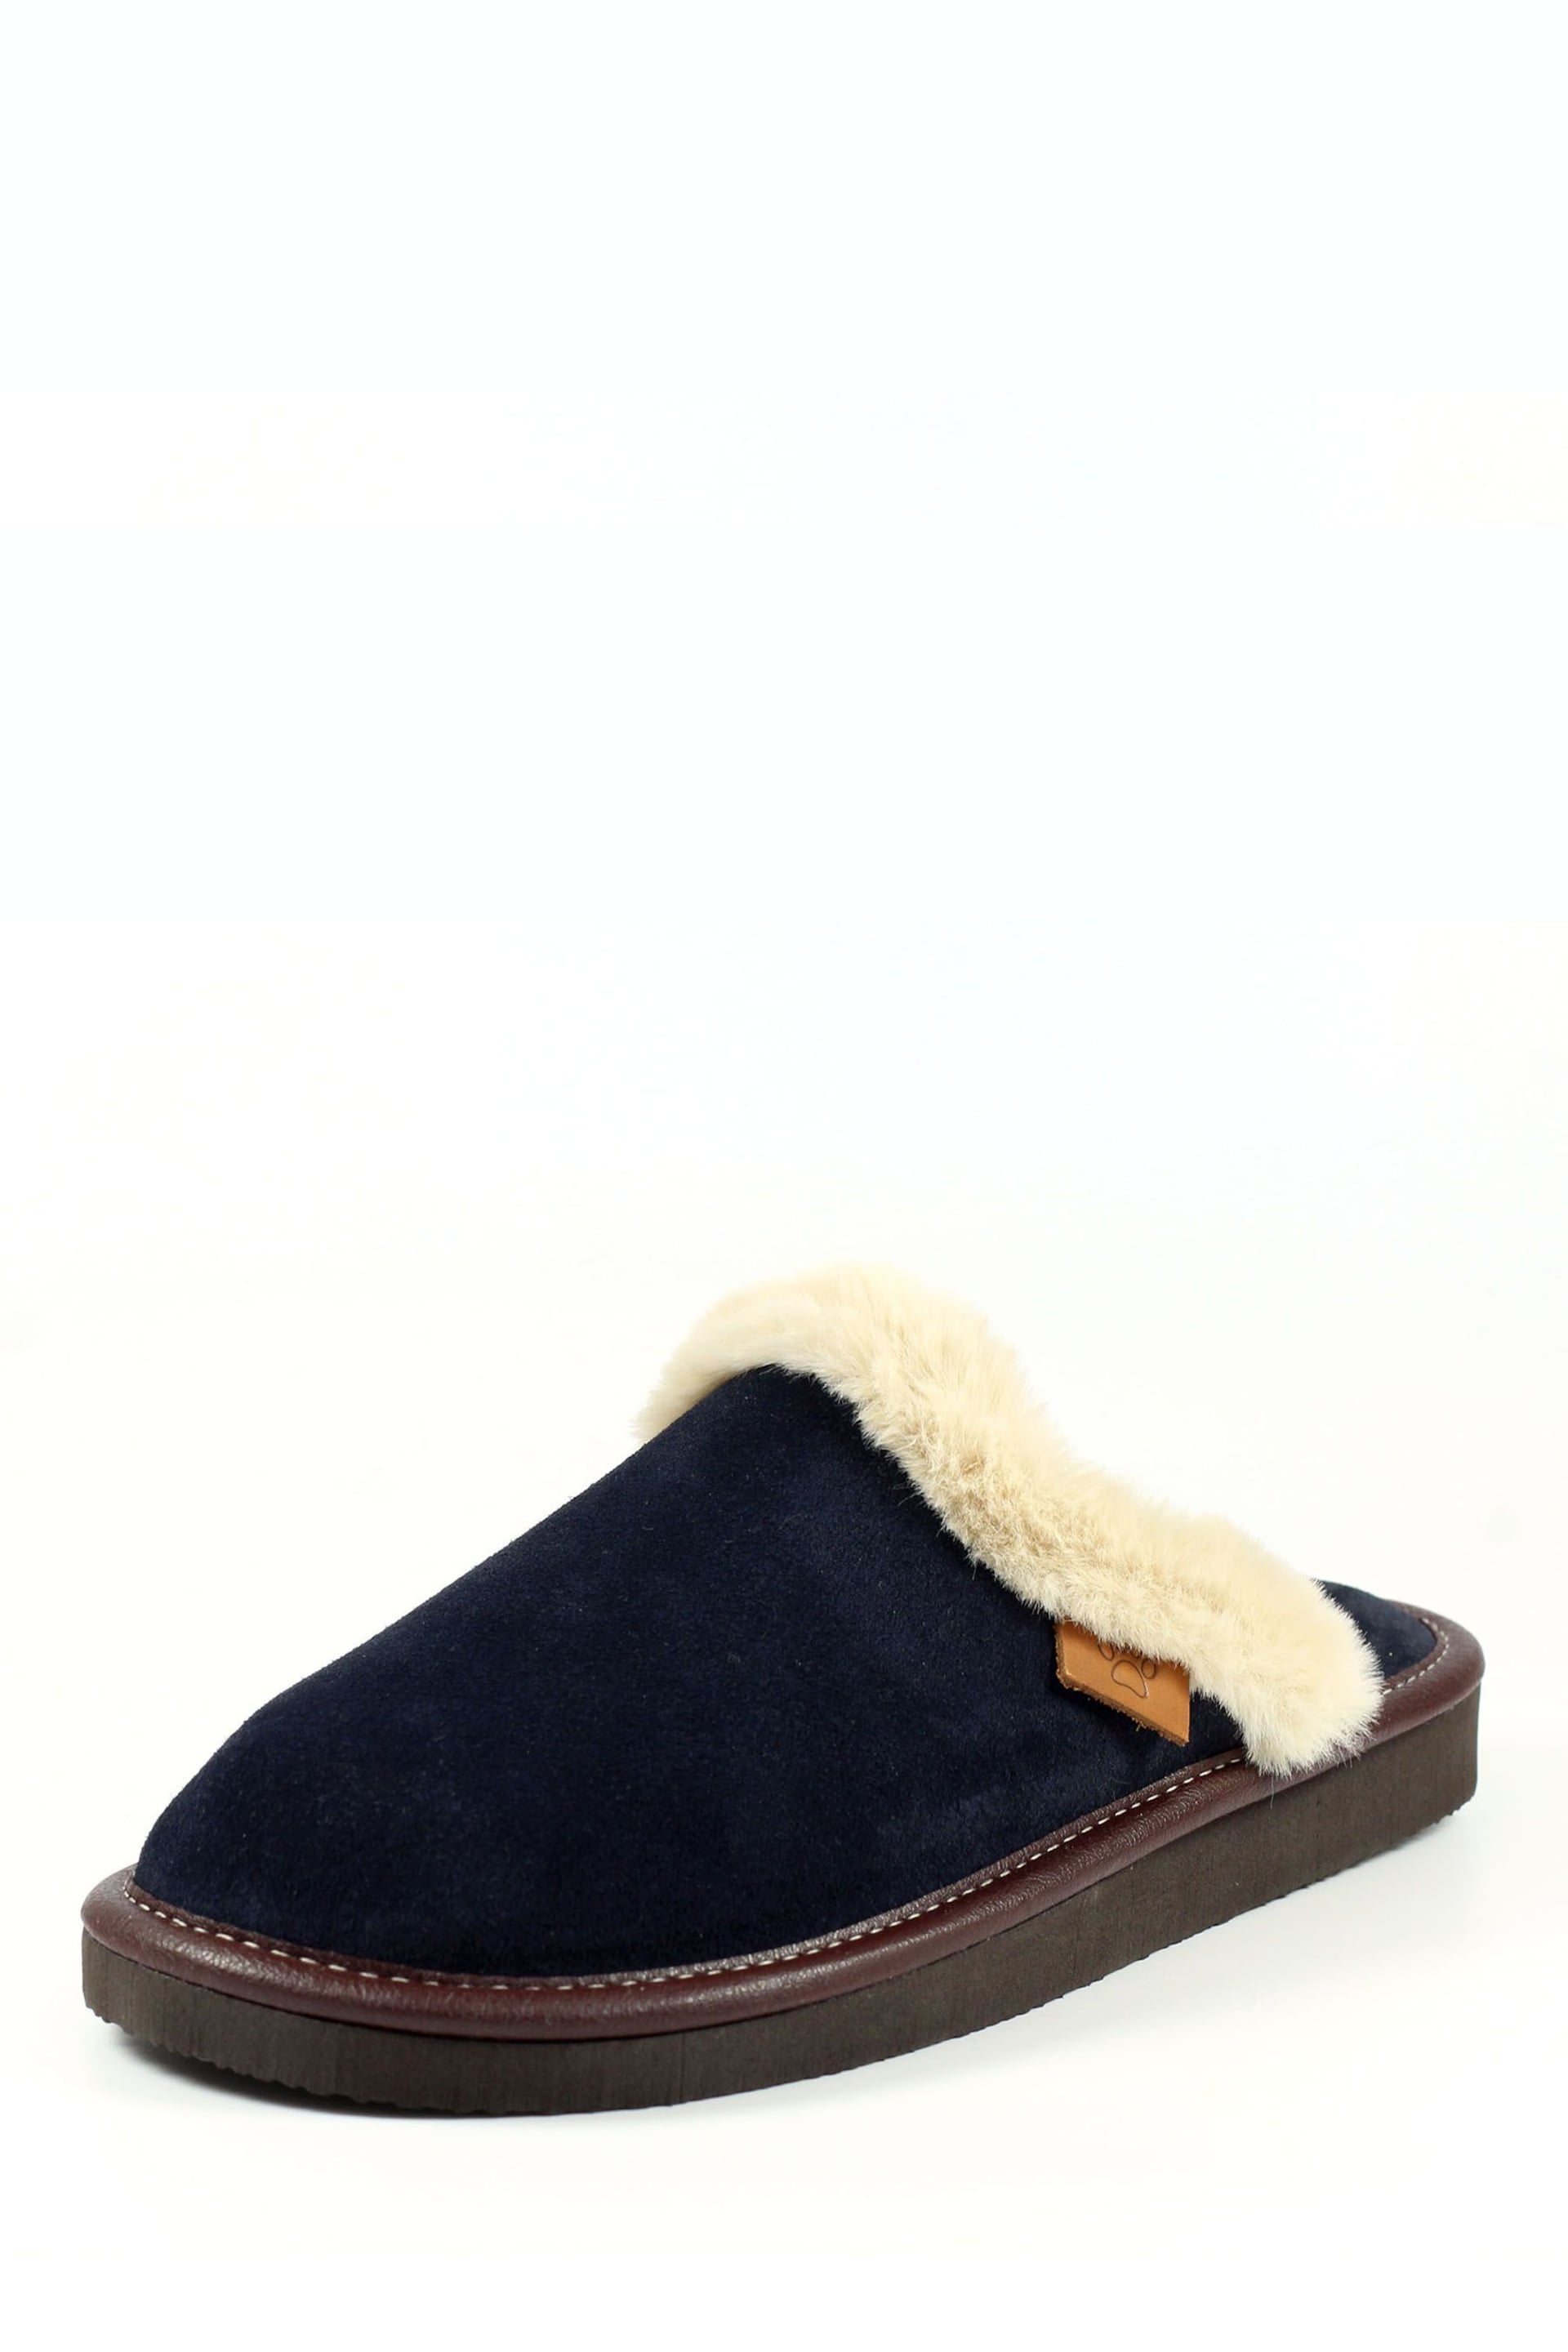 Lunar Lazy Dogz Otto Suede Mule Slippers - Image 3 of 10